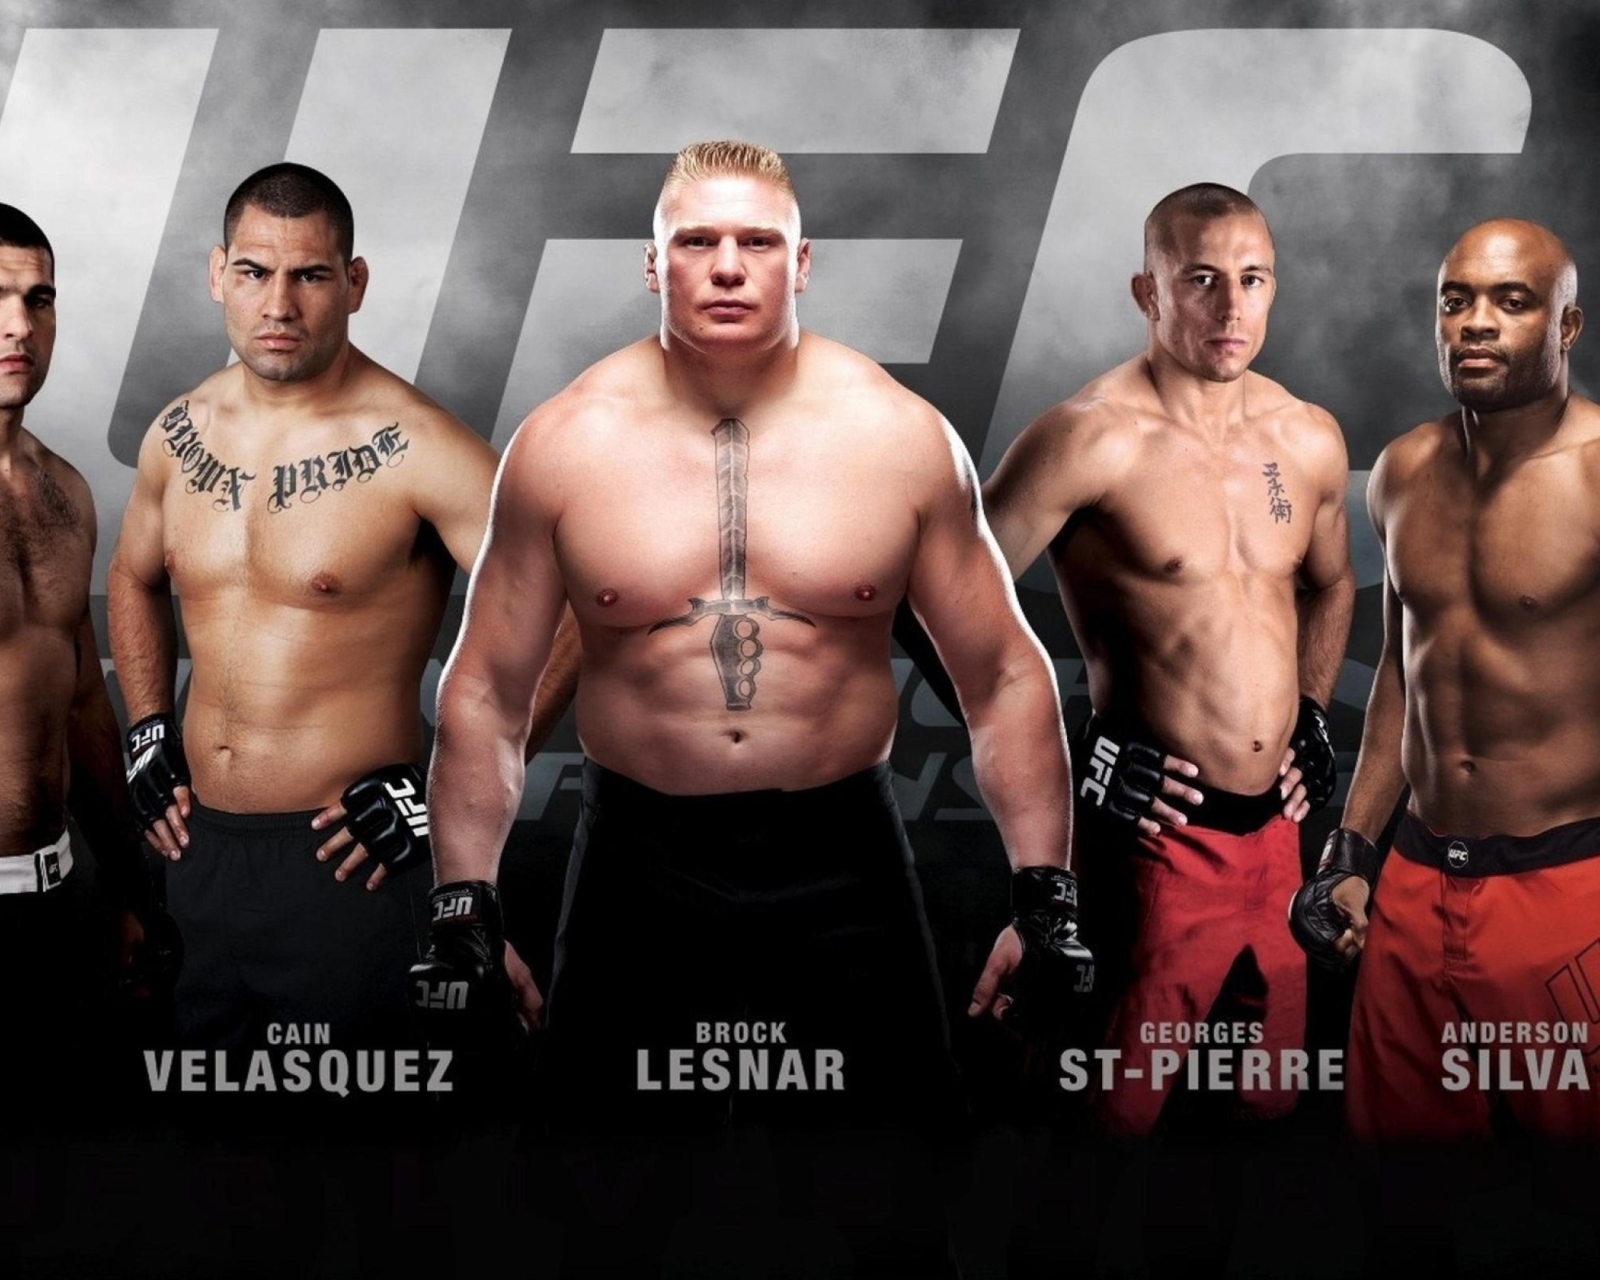 Ufc Mma Mixed Fighters wallpaper 1600x1280